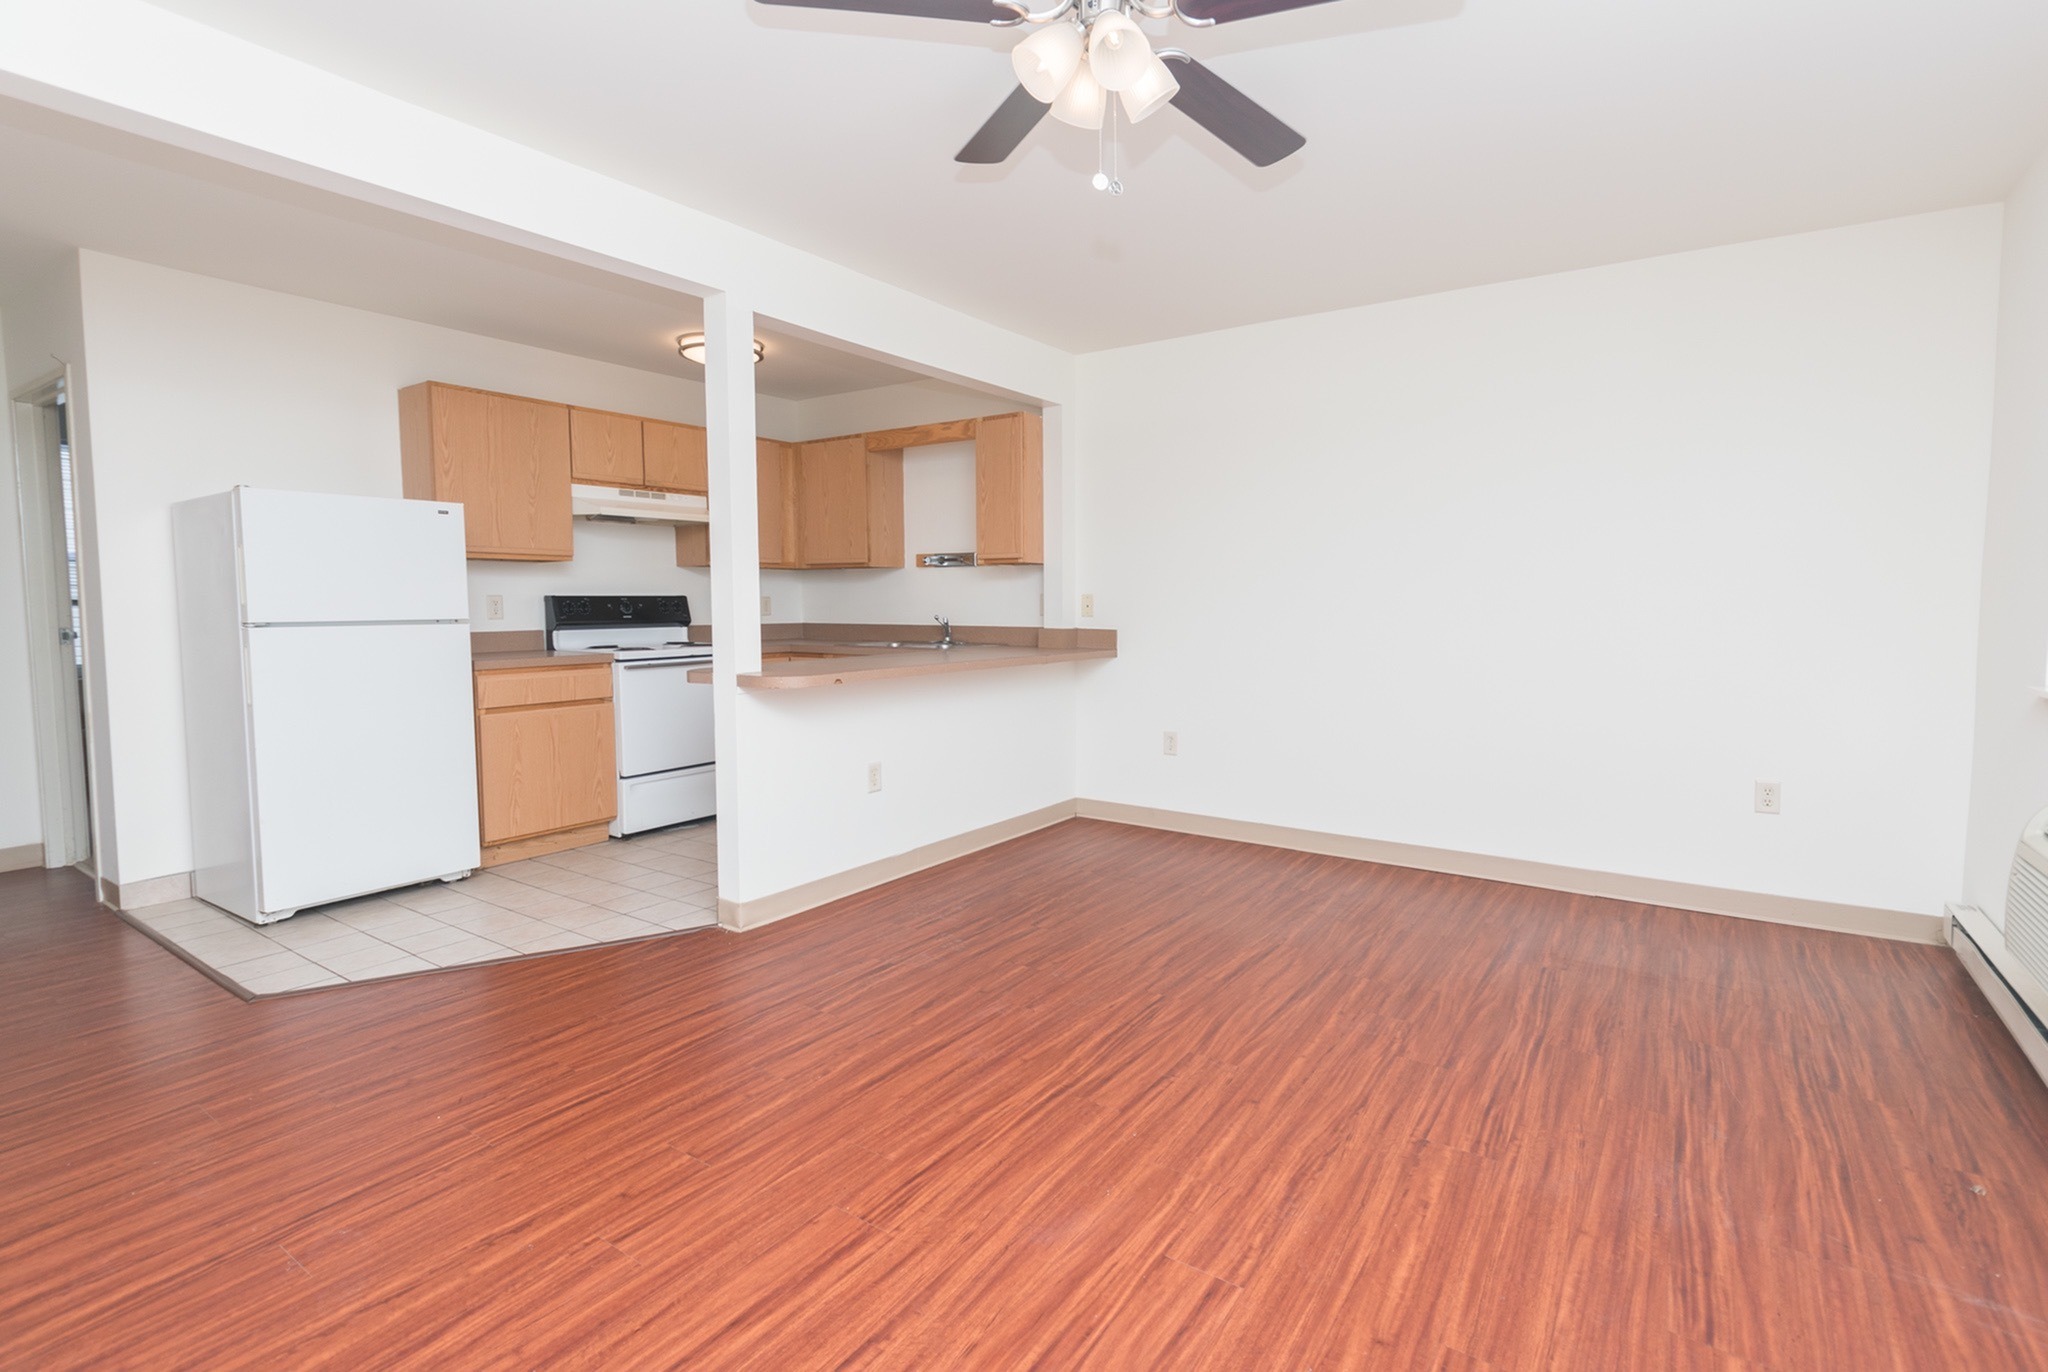 Spacious living and dining area with a ceiling fan next to the kitchen area.